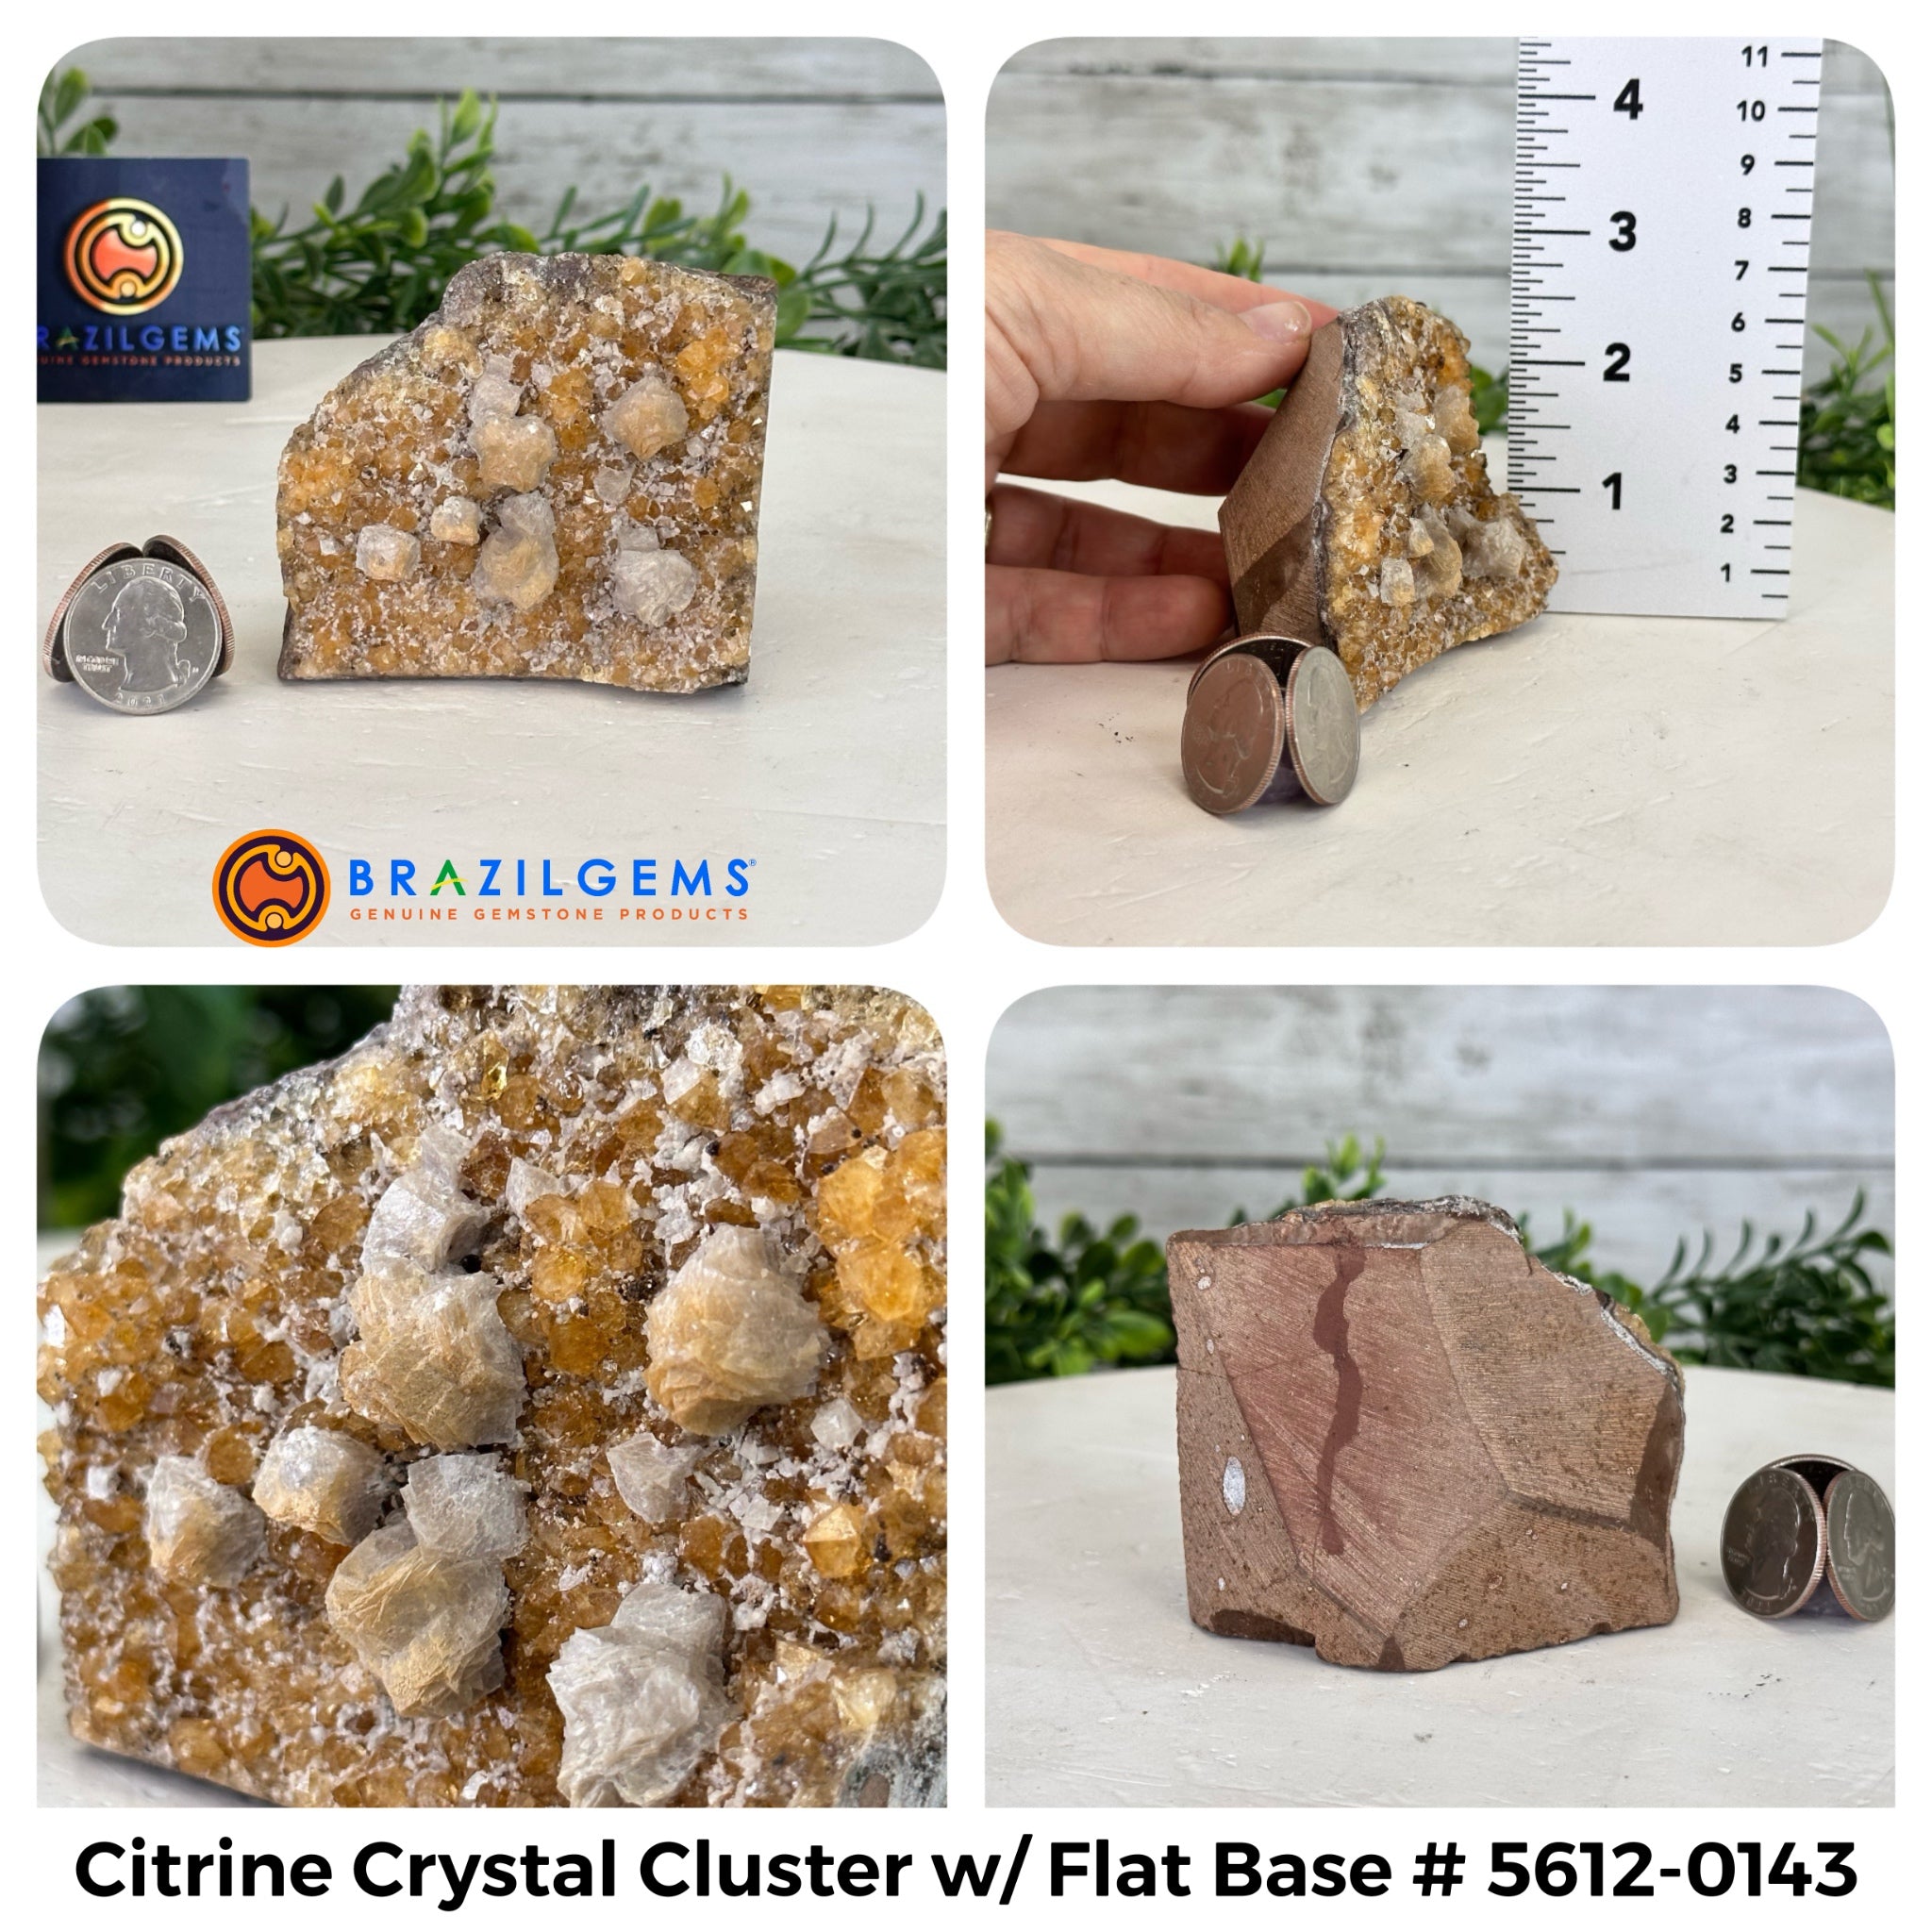 Small Citrine Crystal Cluster w/ flat base, Various Options #5612 - Brazil GemsBrazil GemsSmall Citrine Crystal Cluster w/ flat base, Various Options #5612Small Clusters with Flat Bases5612-0143